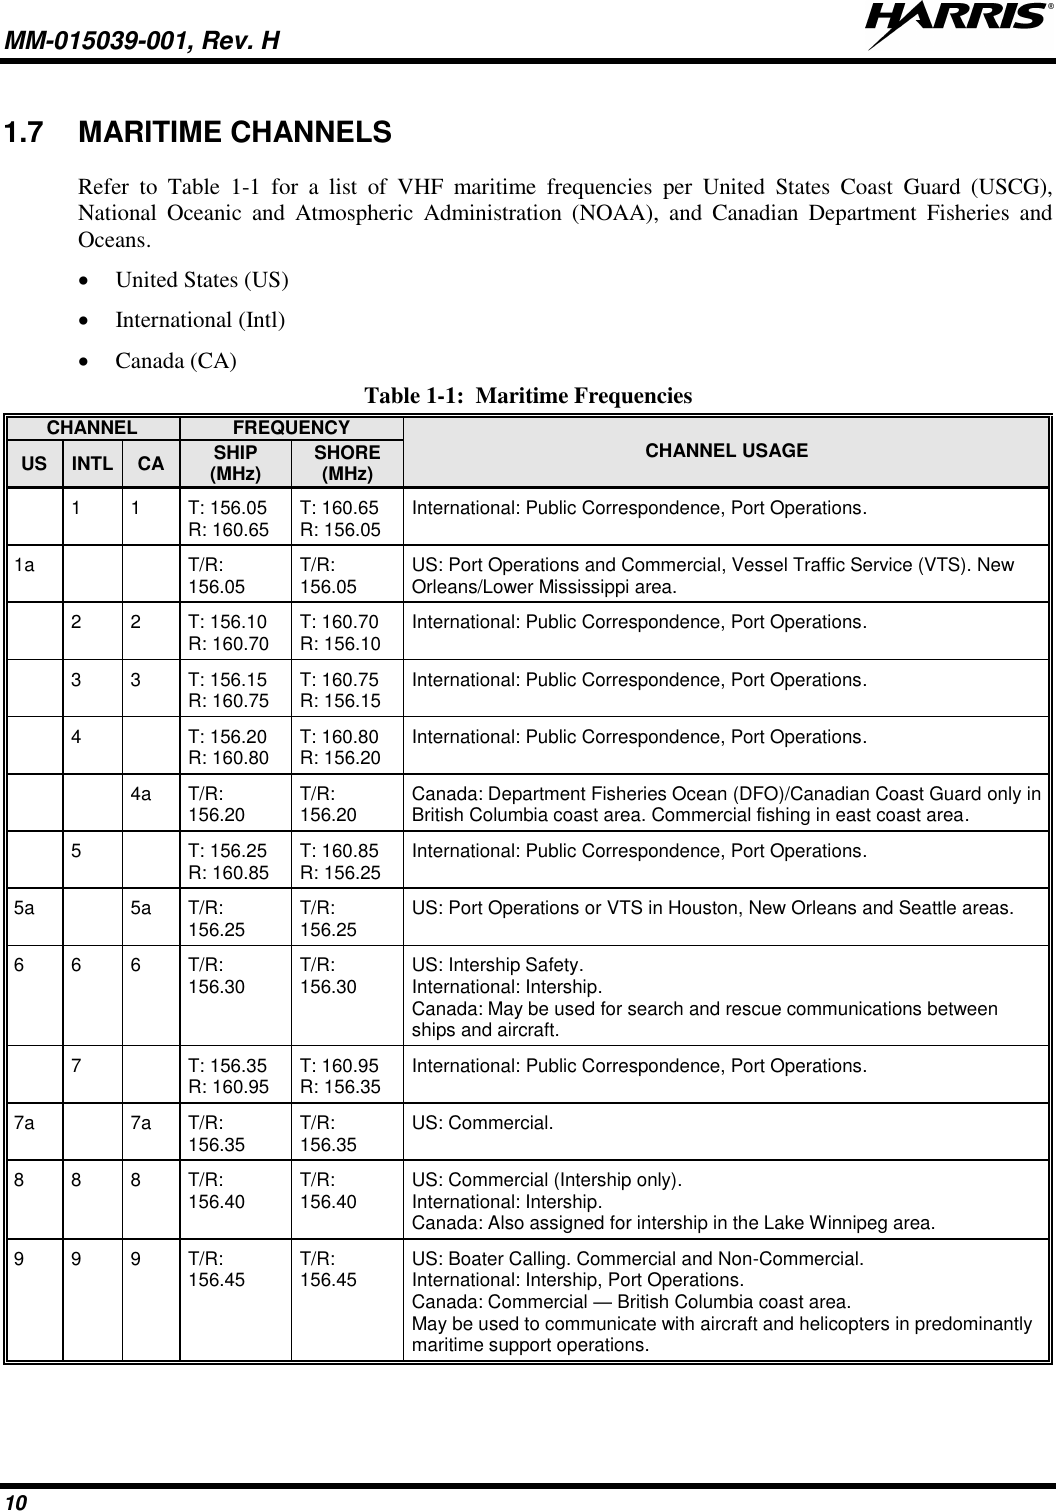 MM-015039-001, Rev. H     10 1.7  MARITIME CHANNELS Refer  to  Table  1-1  for  a  list  of  VHF  maritime  frequencies  per  United  States  Coast  Guard  (USCG), National  Oceanic  and  Atmospheric  Administration  (NOAA),  and  Canadian  Department  Fisheries  and Oceans.  United States (US)  International (Intl)  Canada (CA) Table 1-1:  Maritime Frequencies CHANNEL FREQUENCY CHANNEL USAGE US INTL CA SHIP (MHz) SHORE (MHz)  1 1 T: 156.05 R: 160.65 T: 160.65 R: 156.05 International: Public Correspondence, Port Operations. 1a   T/R: 156.05 T/R: 156.05 US: Port Operations and Commercial, Vessel Traffic Service (VTS). New Orleans/Lower Mississippi area.   2 2 T: 156.10 R: 160.70 T: 160.70  R: 156.10 International: Public Correspondence, Port Operations.  3 3 T: 156.15 R: 160.75 T: 160.75 R: 156.15 International: Public Correspondence, Port Operations.  4  T: 156.20  R: 160.80 T: 160.80  R: 156.20 International: Public Correspondence, Port Operations.   4a T/R: 156.20 T/R: 156.20 Canada: Department Fisheries Ocean (DFO)/Canadian Coast Guard only in British Columbia coast area. Commercial fishing in east coast area.  5  T: 156.25  R: 160.85 T: 160.85  R: 156.25 International: Public Correspondence, Port Operations. 5a  5a T/R: 156.25 T/R: 156.25 US: Port Operations or VTS in Houston, New Orleans and Seattle areas. 6 6 6 T/R: 156.30 T/R: 156.30 US: Intership Safety. International: Intership. Canada: May be used for search and rescue communications between ships and aircraft.  7  T: 156.35  R: 160.95 T: 160.95  R: 156.35 International: Public Correspondence, Port Operations. 7a  7a T/R: 156.35 T/R: 156.35 US: Commercial. 8 8 8 T/R: 156.40 T/R: 156.40 US: Commercial (Intership only). International: Intership. Canada: Also assigned for intership in the Lake Winnipeg area. 9 9 9 T/R: 156.45 T/R: 156.45 US: Boater Calling. Commercial and Non-Commercial. International: Intership, Port Operations. Canada: Commercial — British Columbia coast area. May be used to communicate with aircraft and helicopters in predominantly maritime support operations. 